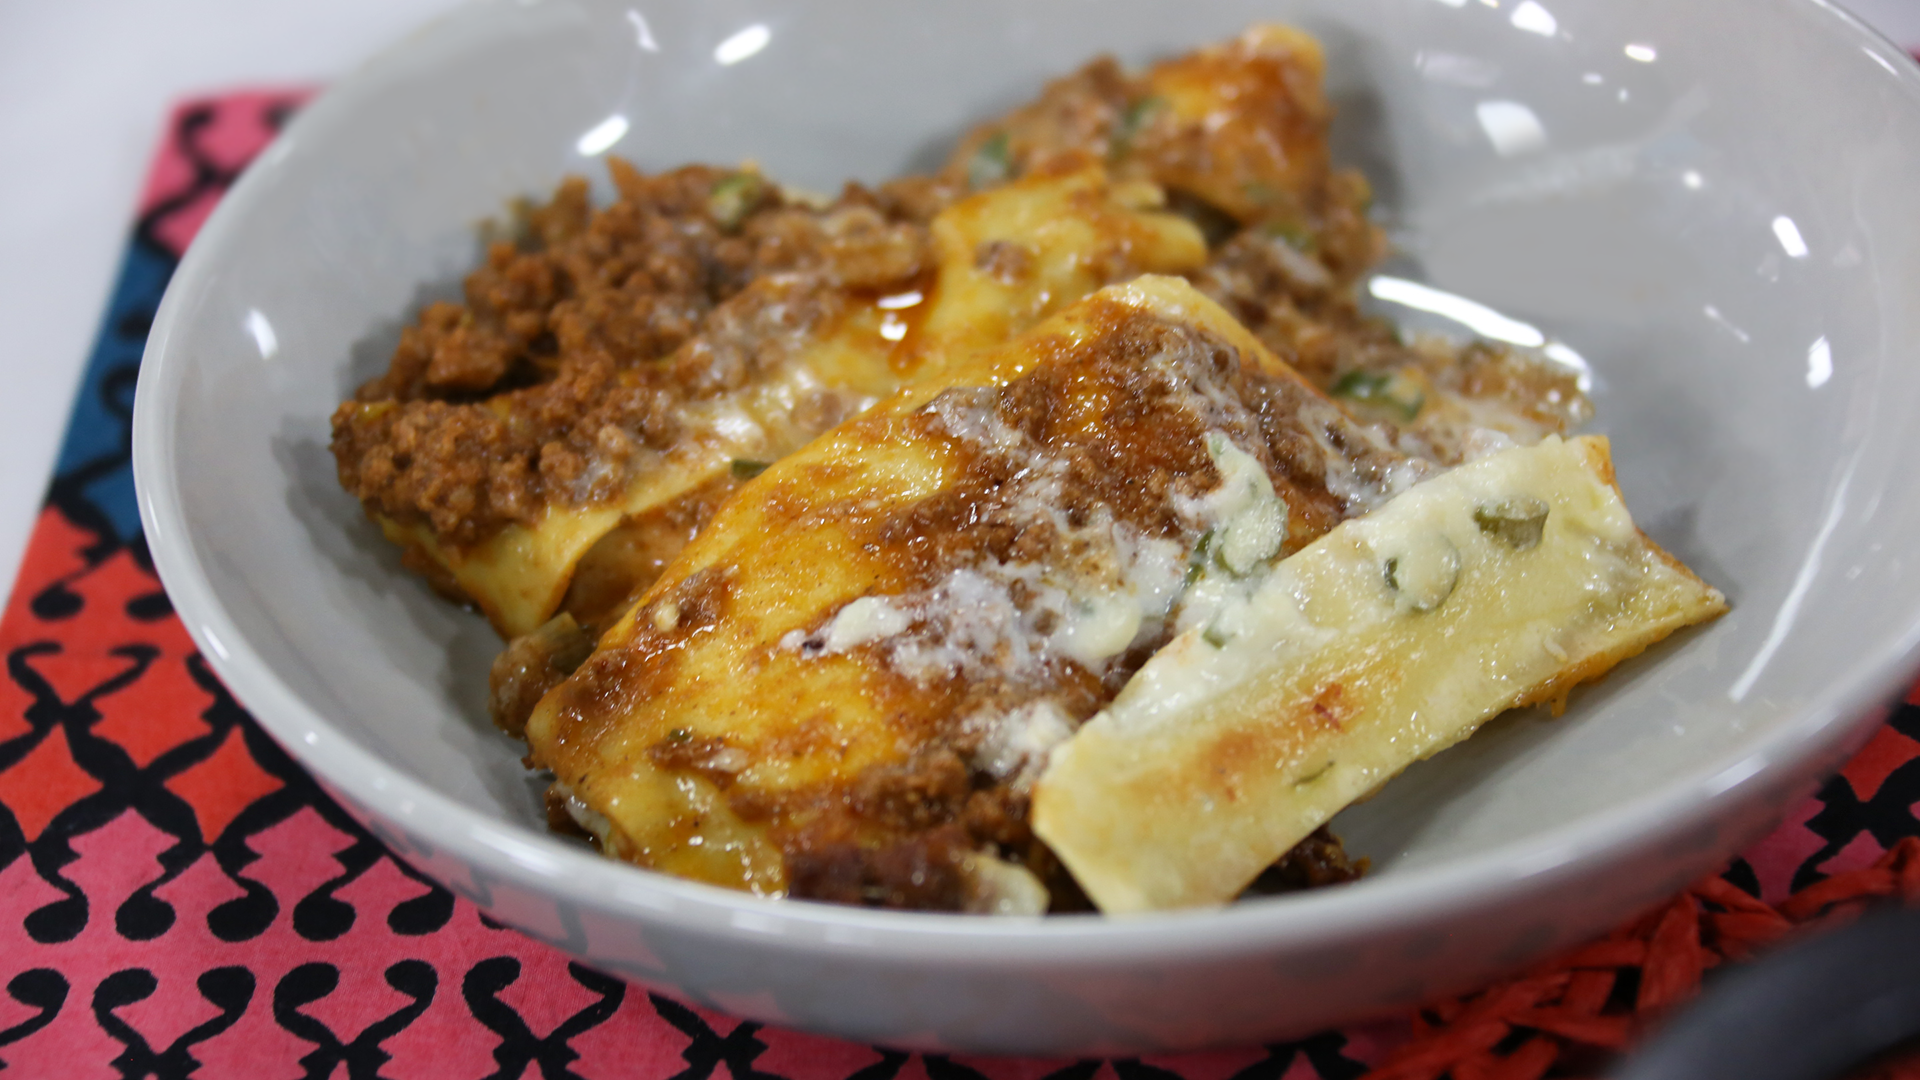 Lasagna with an Indian twist